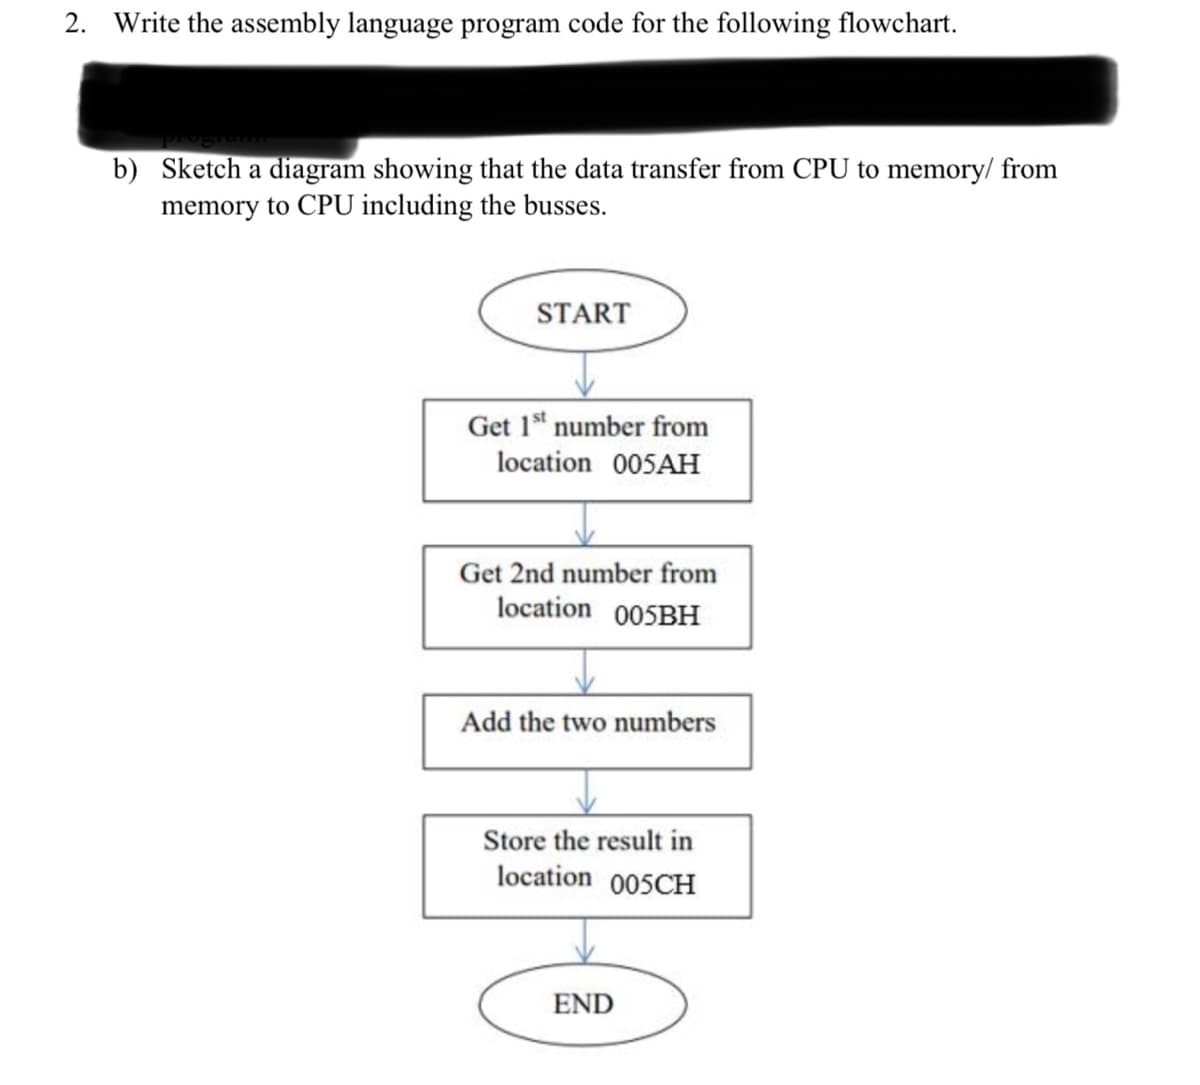 2. Write the assembly language program code for the following flowchart.
b) Sketch a diagram showing that the data transfer from CPU to memory/ from
memory to CPU including the busses.
START
Get 1" number from
location 005AH
Get 2nd number from
location 005BH
Add the two numbers
Store the result in
location 005CH
END
